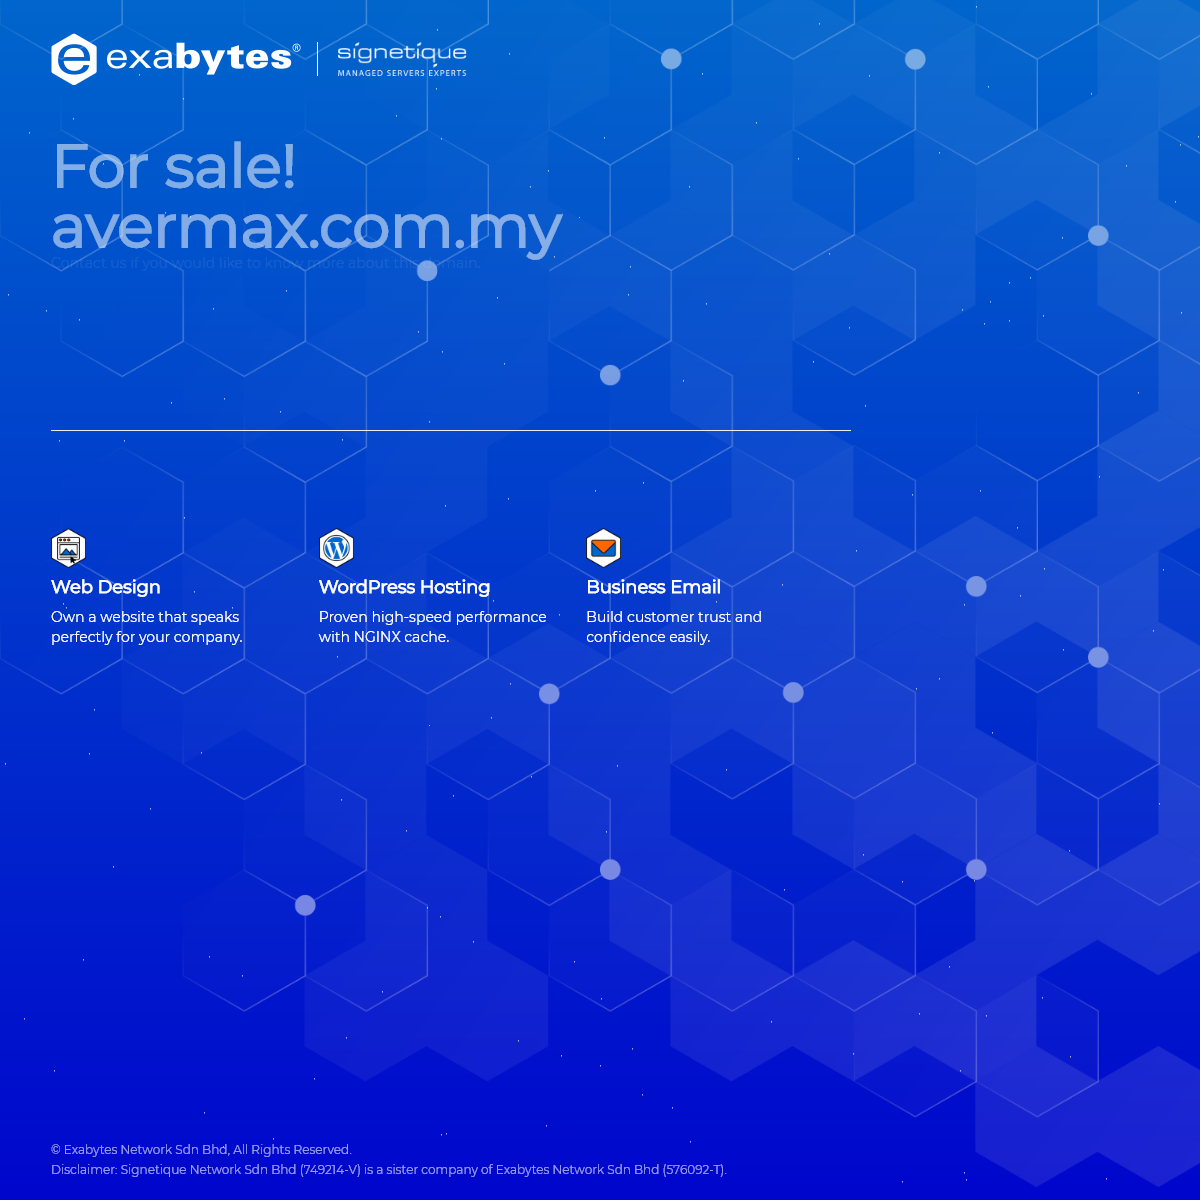 A complete backup of avermax.com.my